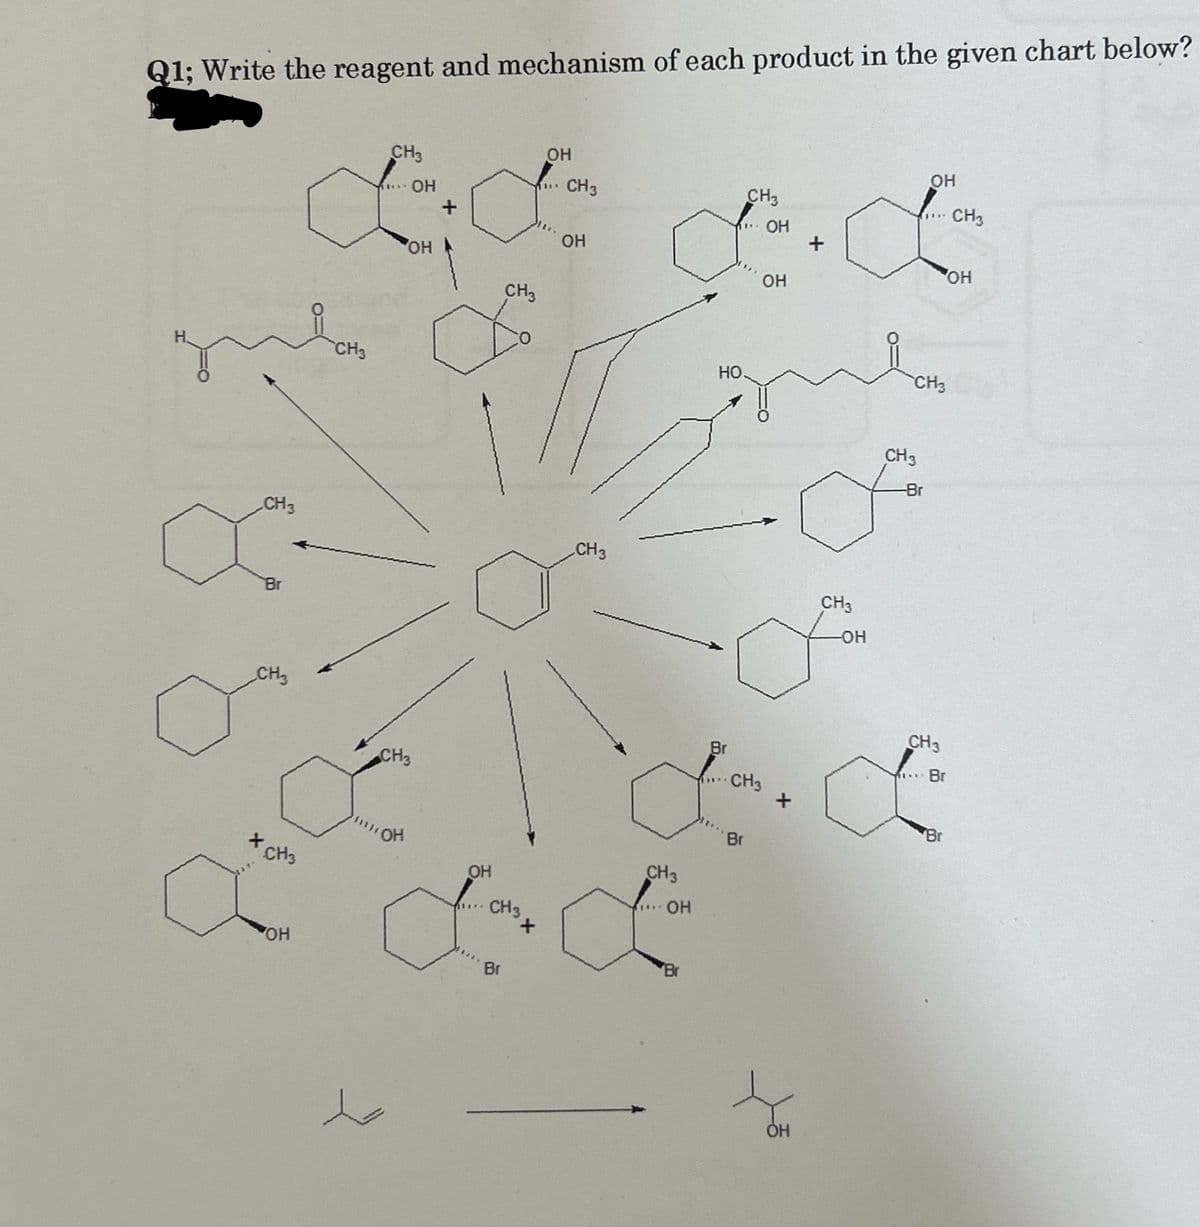 Q1; Write the reagent and mechanism of each product in the given chart below?
с
CH3
Br
CH3
ХСН3
OH
CH3
CH3
***
OH
ОН
OH
CH3
+
CH3
ОН
CH3
do
Br
ОН
11.
CH3
ОН
CH3
CH3
... OH
'Br
HO
Br
11***
CH3
Br
CH3
ОН
OH
ОН
+
CH3
-OH
CH3
CH3
OH
-Br
CH3
... Br
CH3
ОН